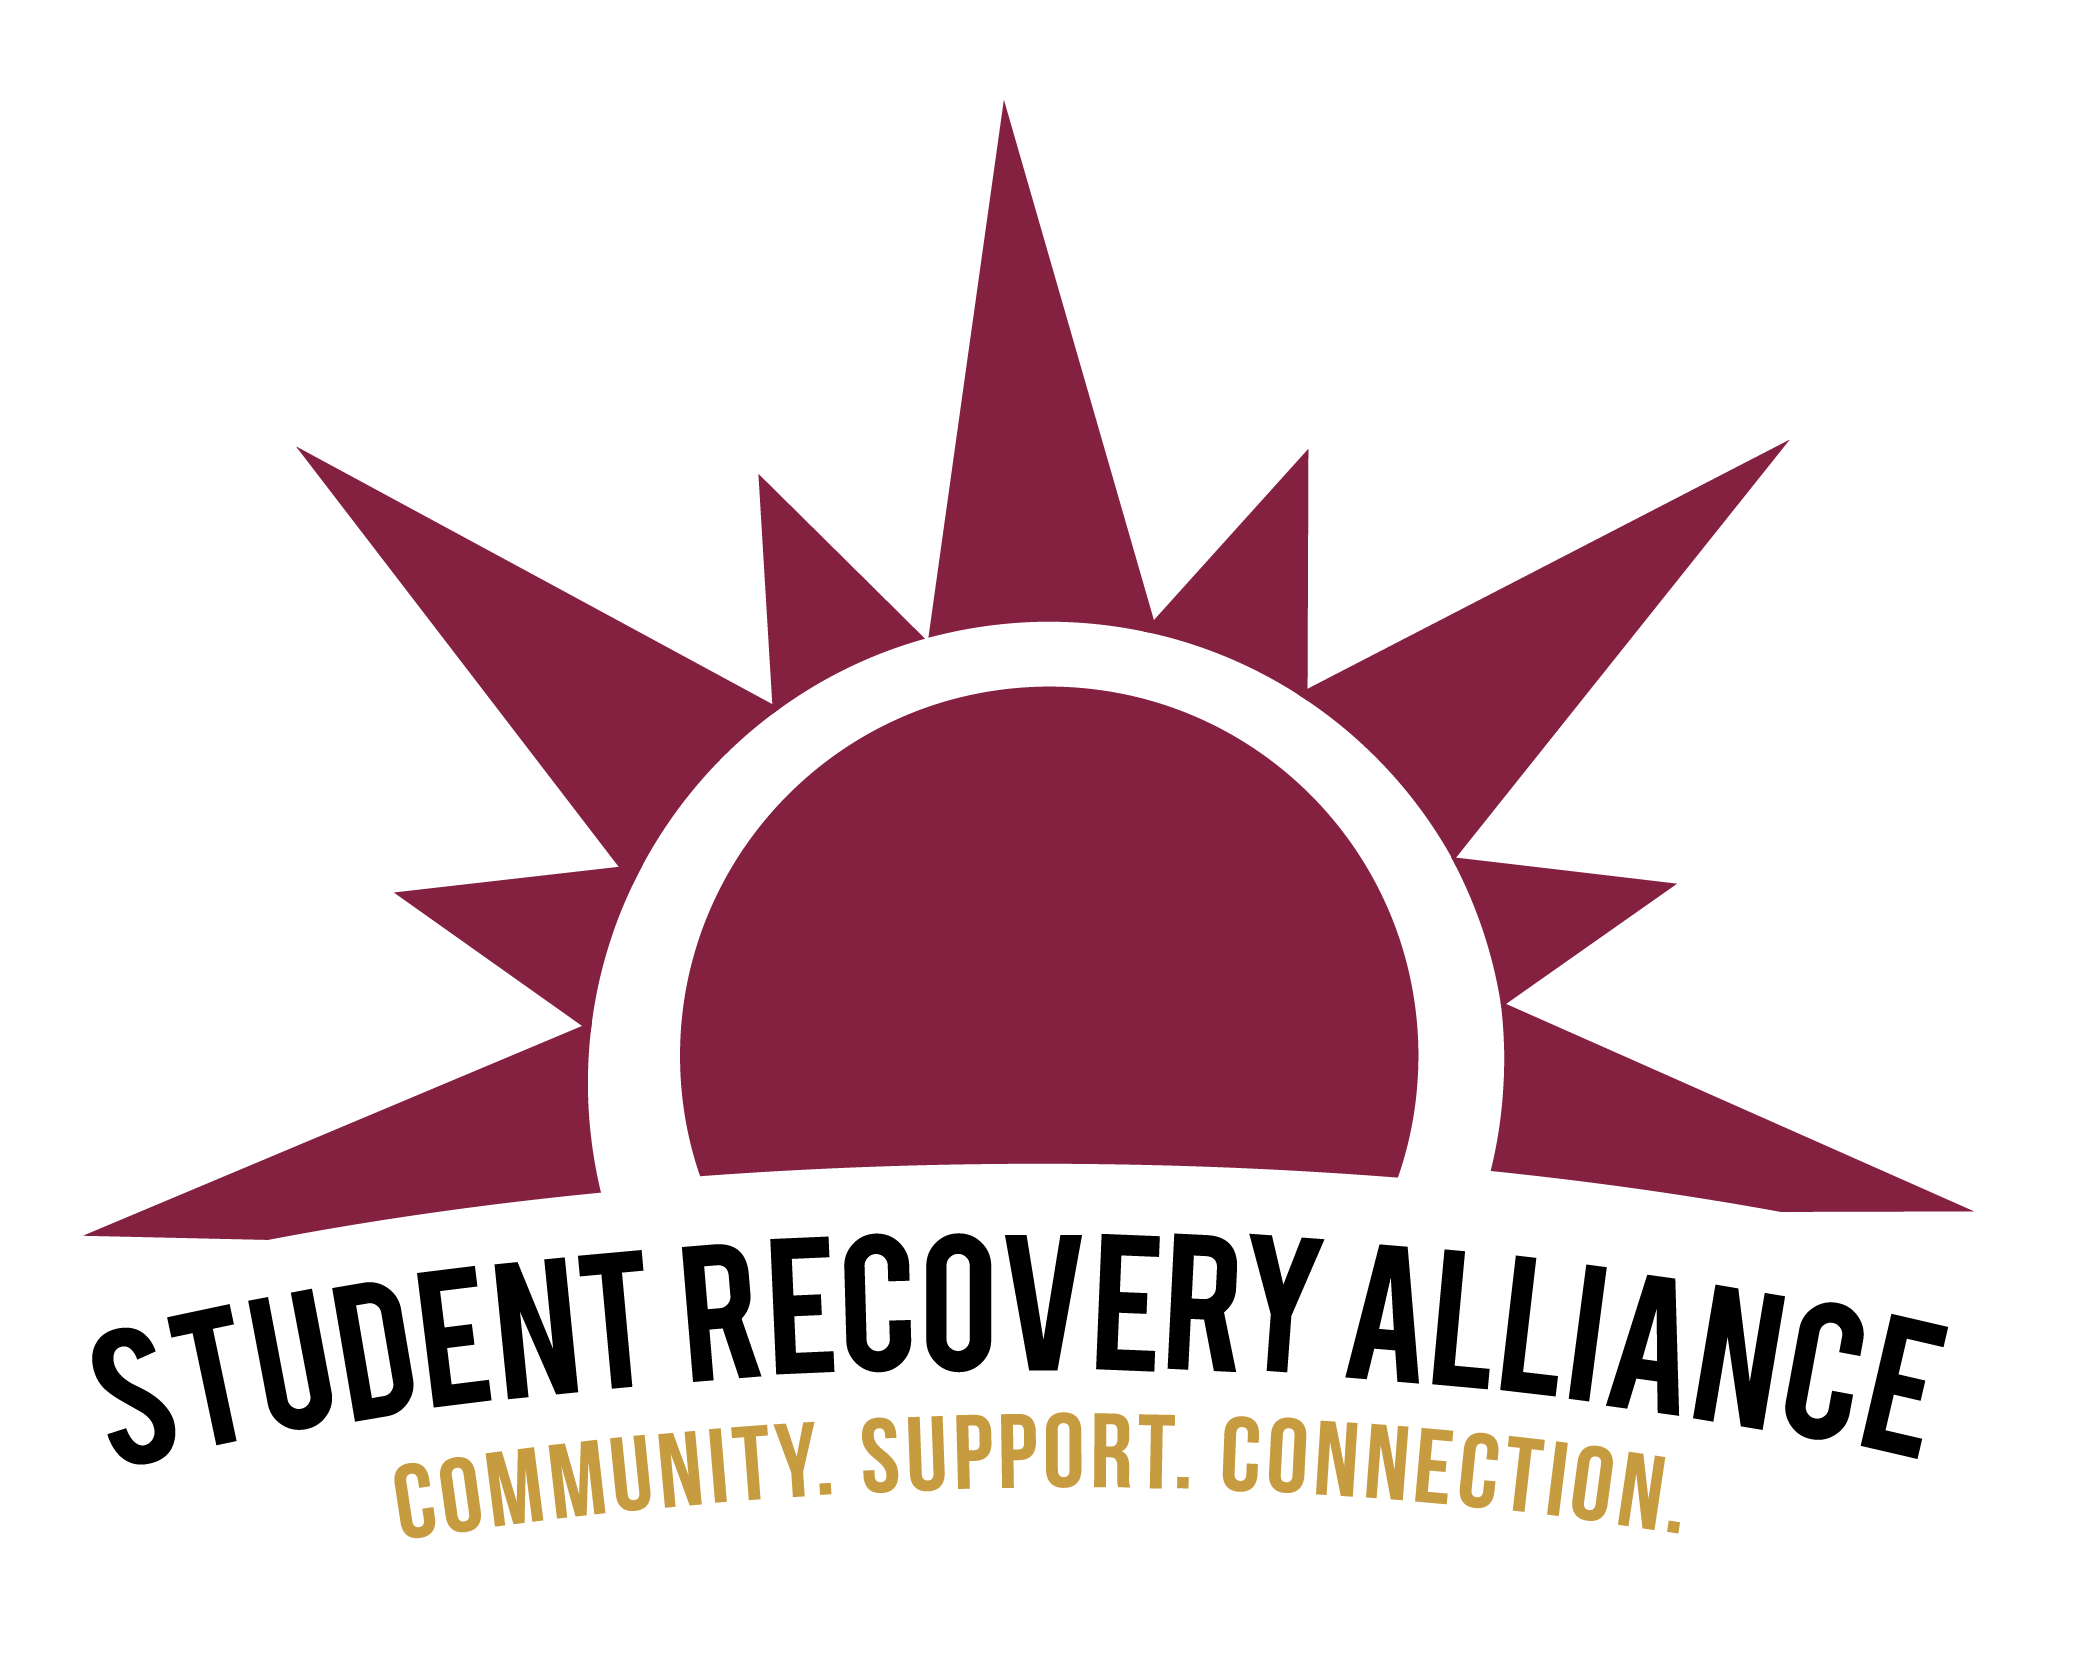 Student Recovery Alliance. Community. Support. Connection,